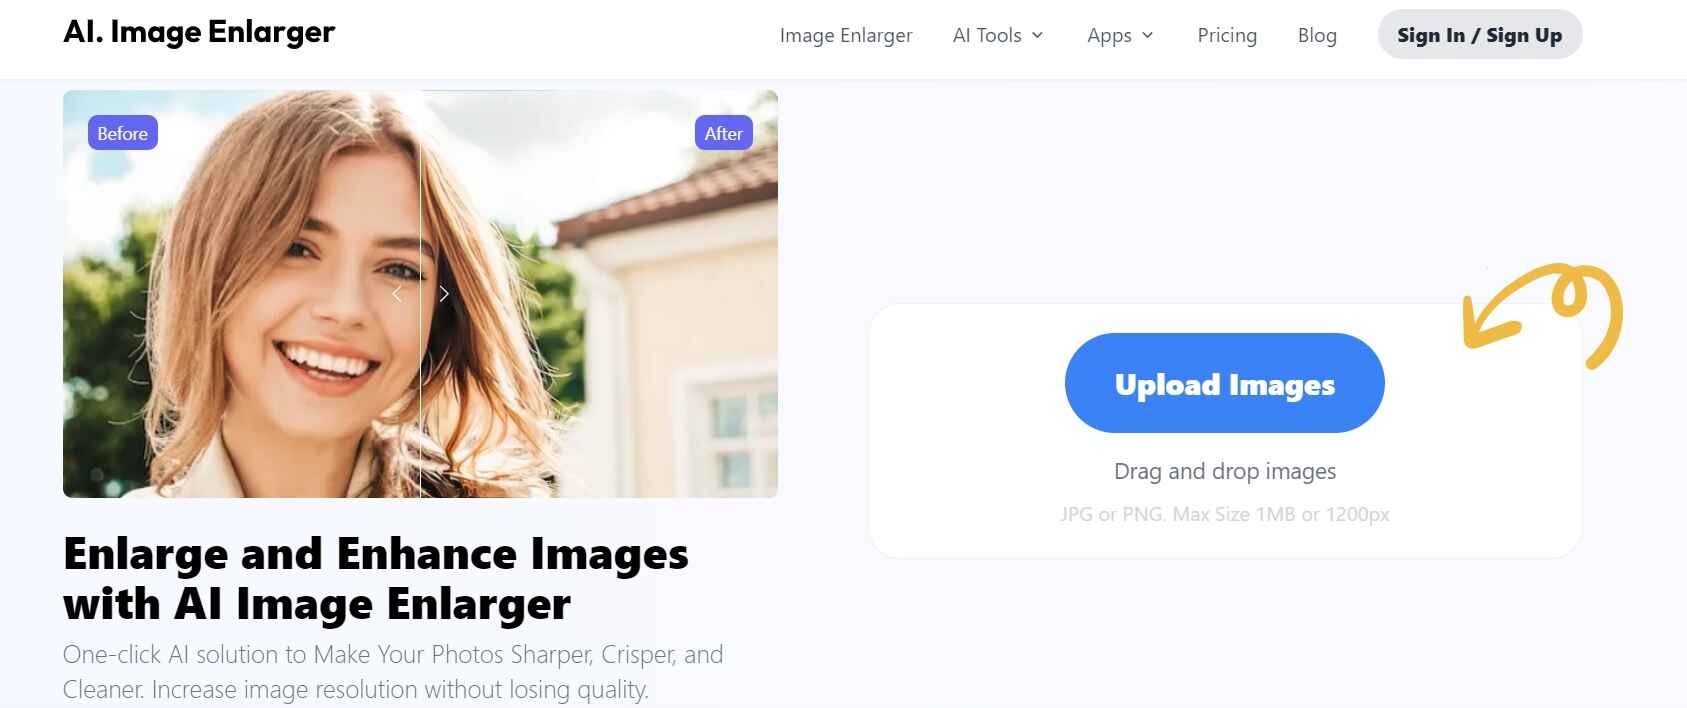 ai image enlager tool